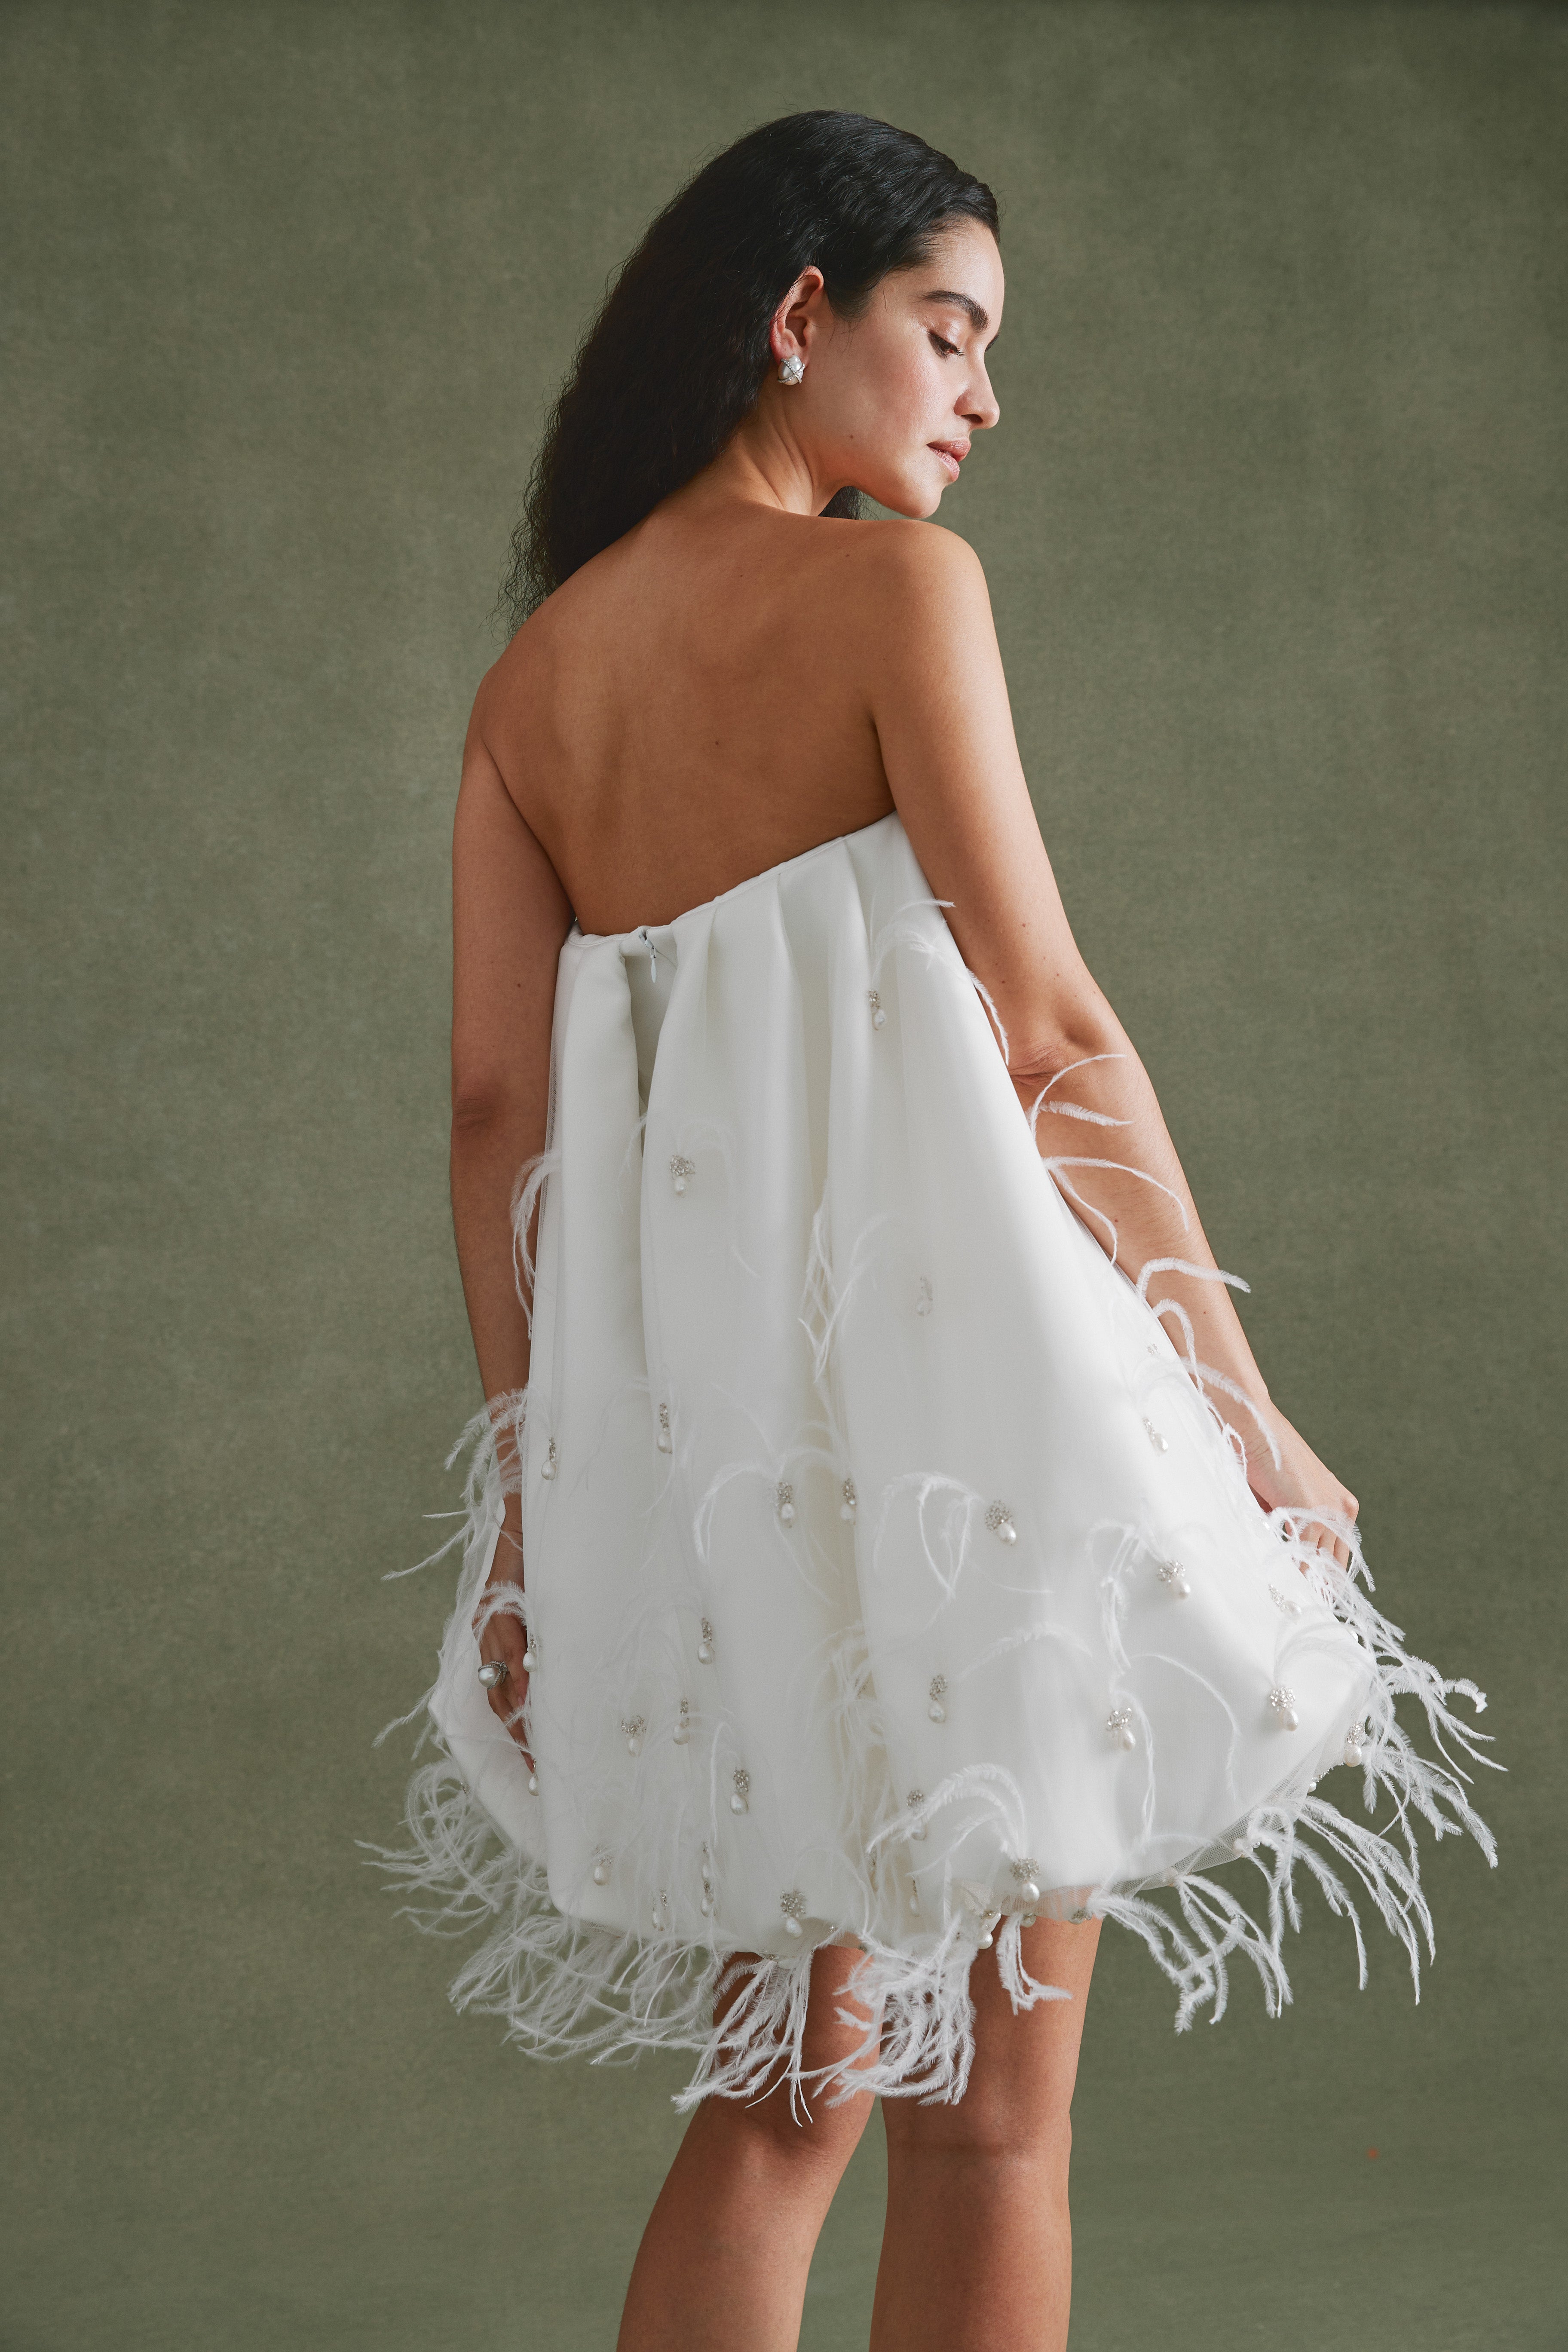 Alexandra Pijut Cloud Dress. Ivory satin mini dress with pearl and feather embellishments. After party, rehearsal dinner outfit.